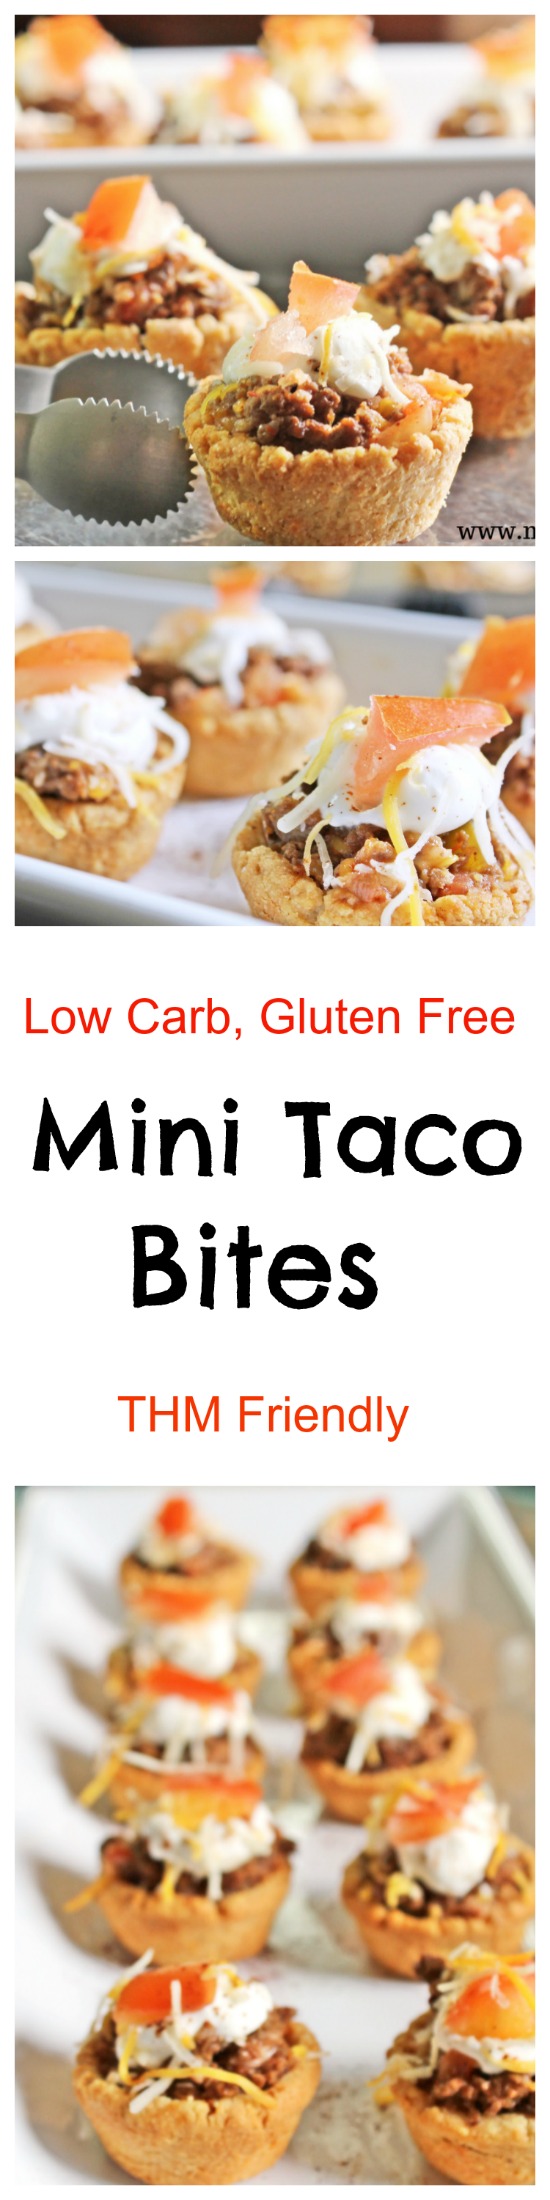 Mini Taco Bites are low carb, gluten free and THM Friendly.